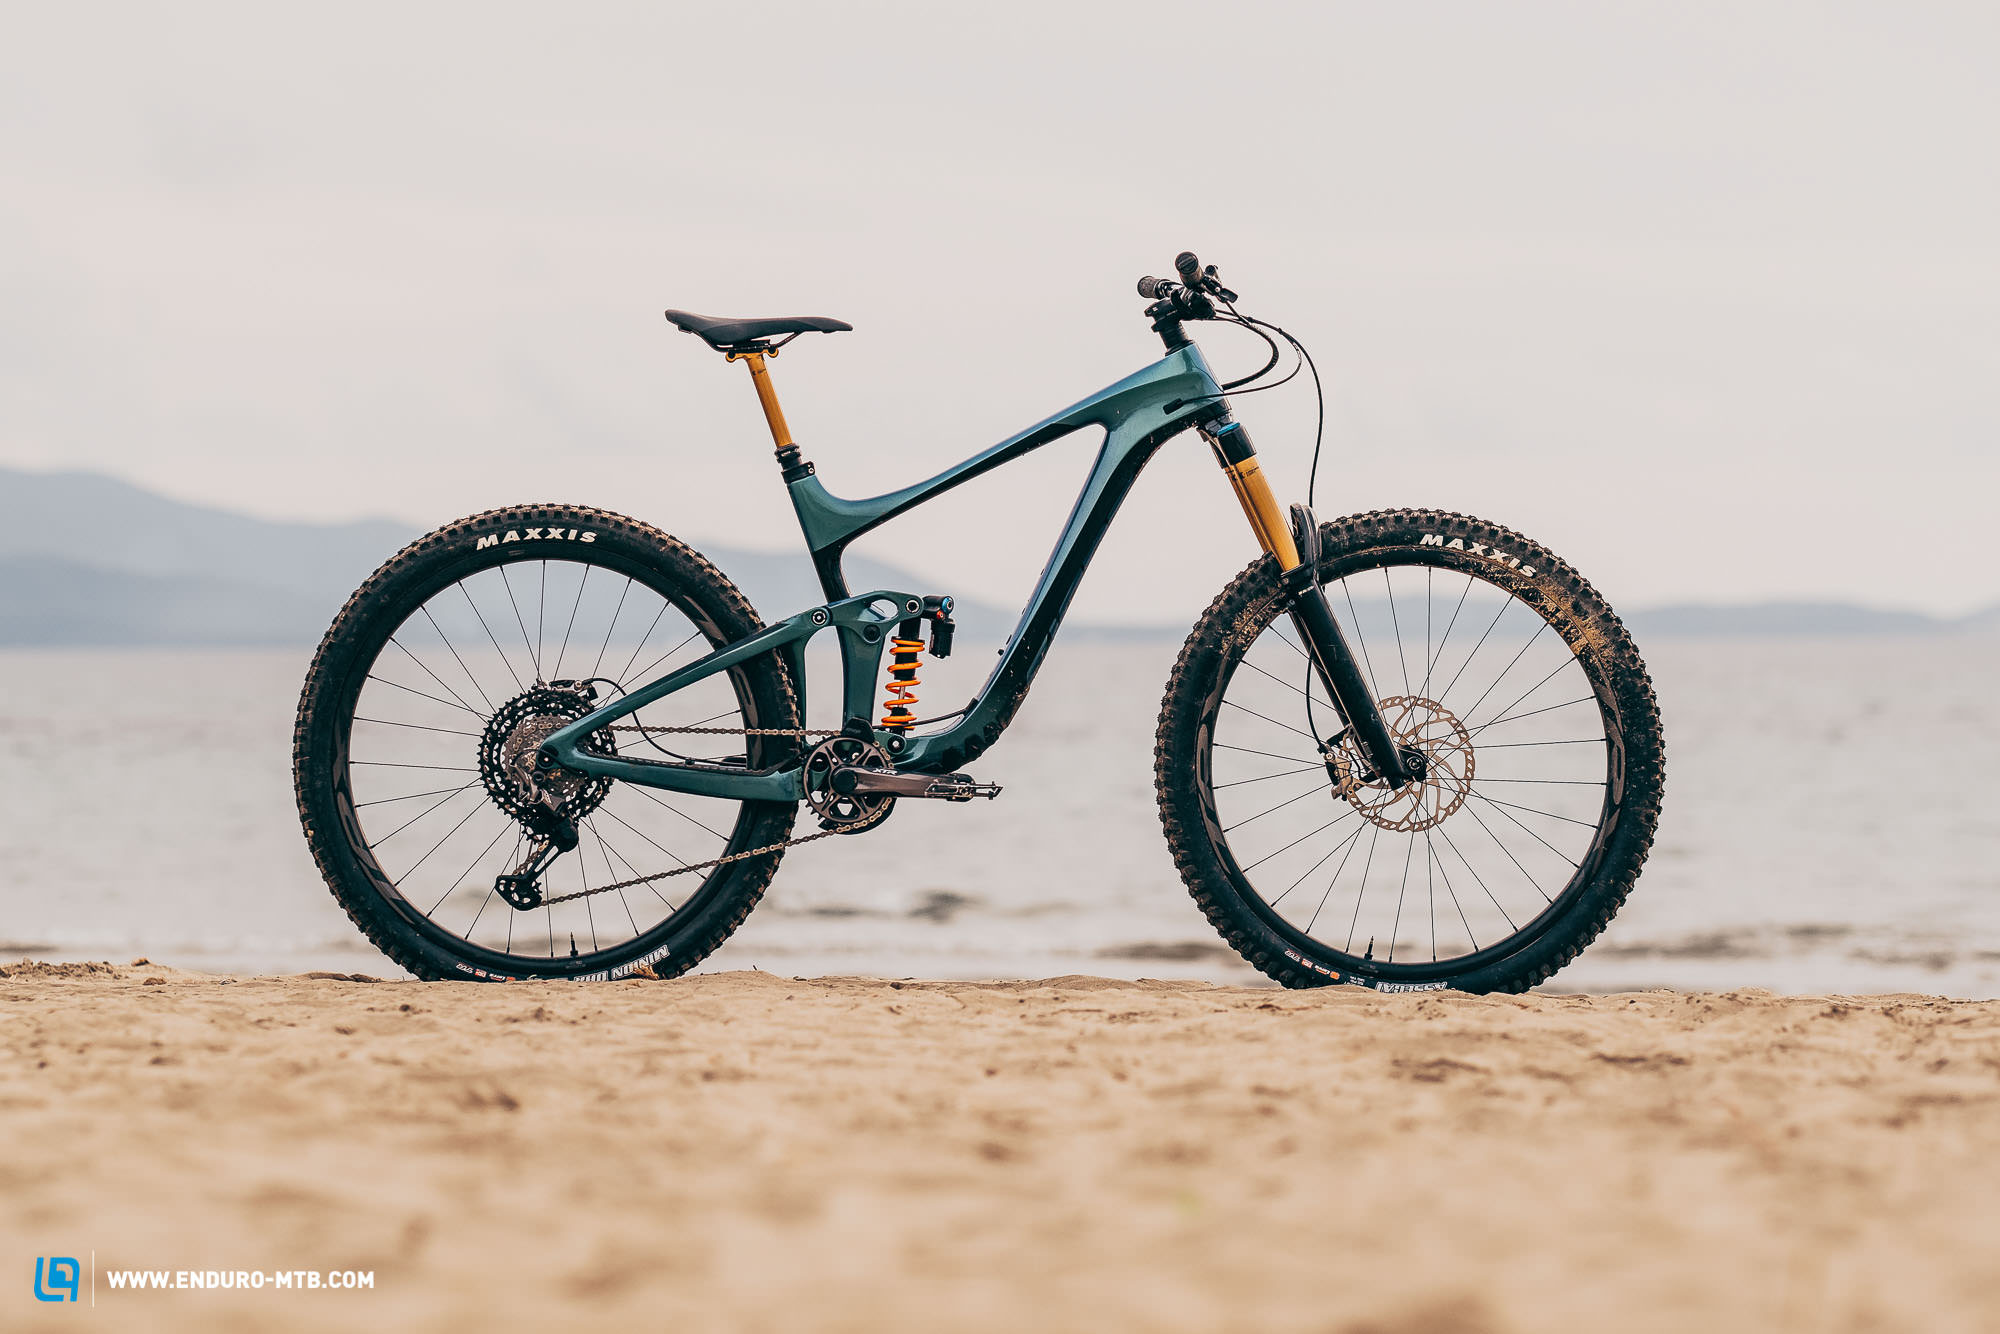 The 2021 GIANT Reign Advanced Pro 0 review